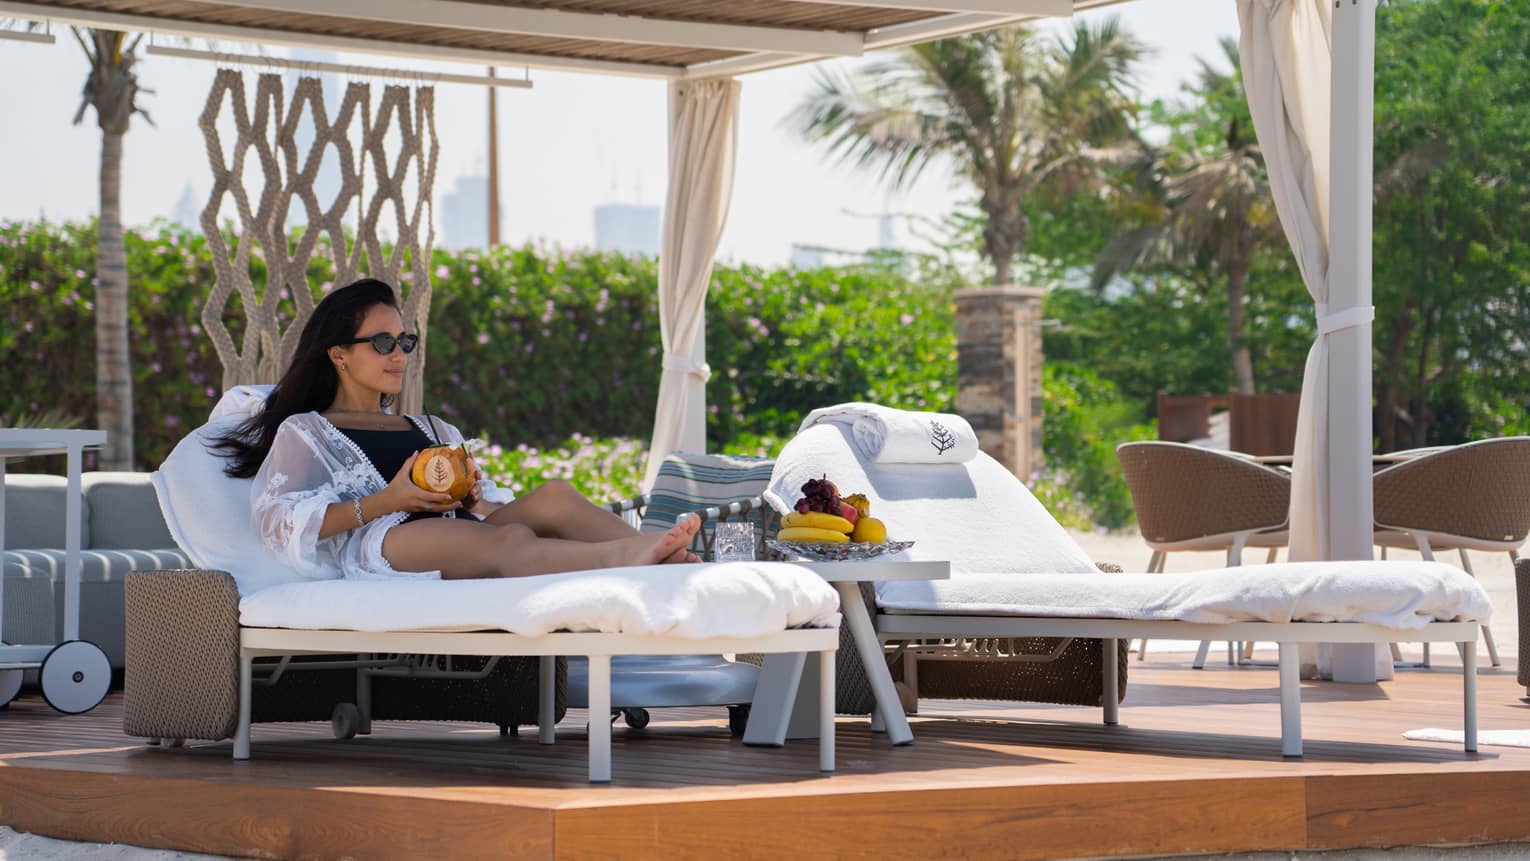 Woman in sunglasses and bathing suit lounges on chaise under poolside private cabana